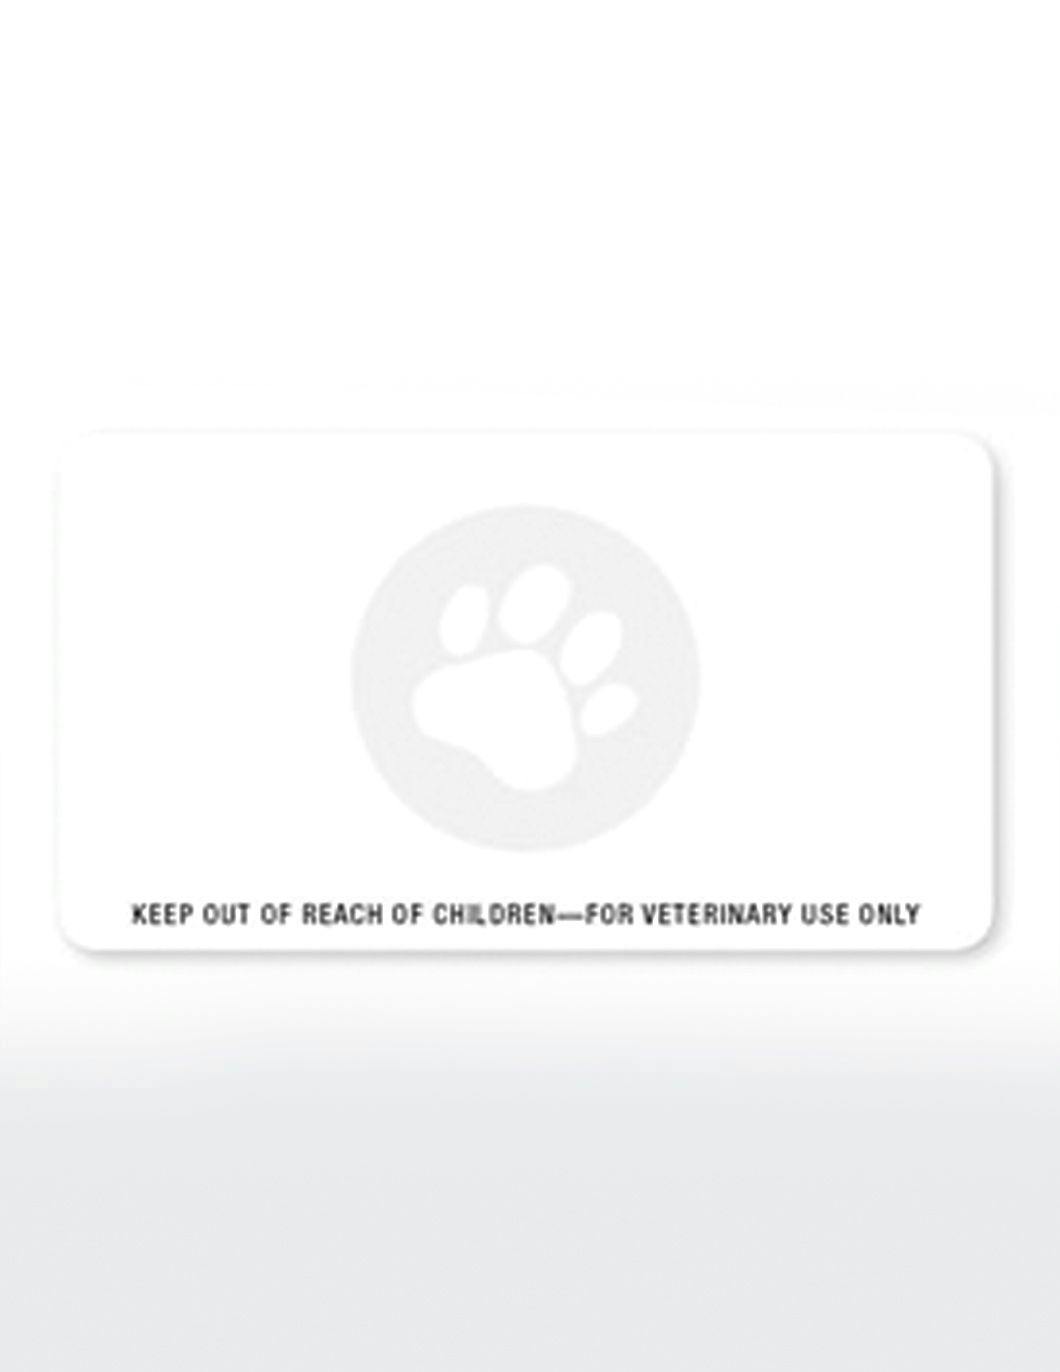 paw-print-zebra-labels-with-warning-2000